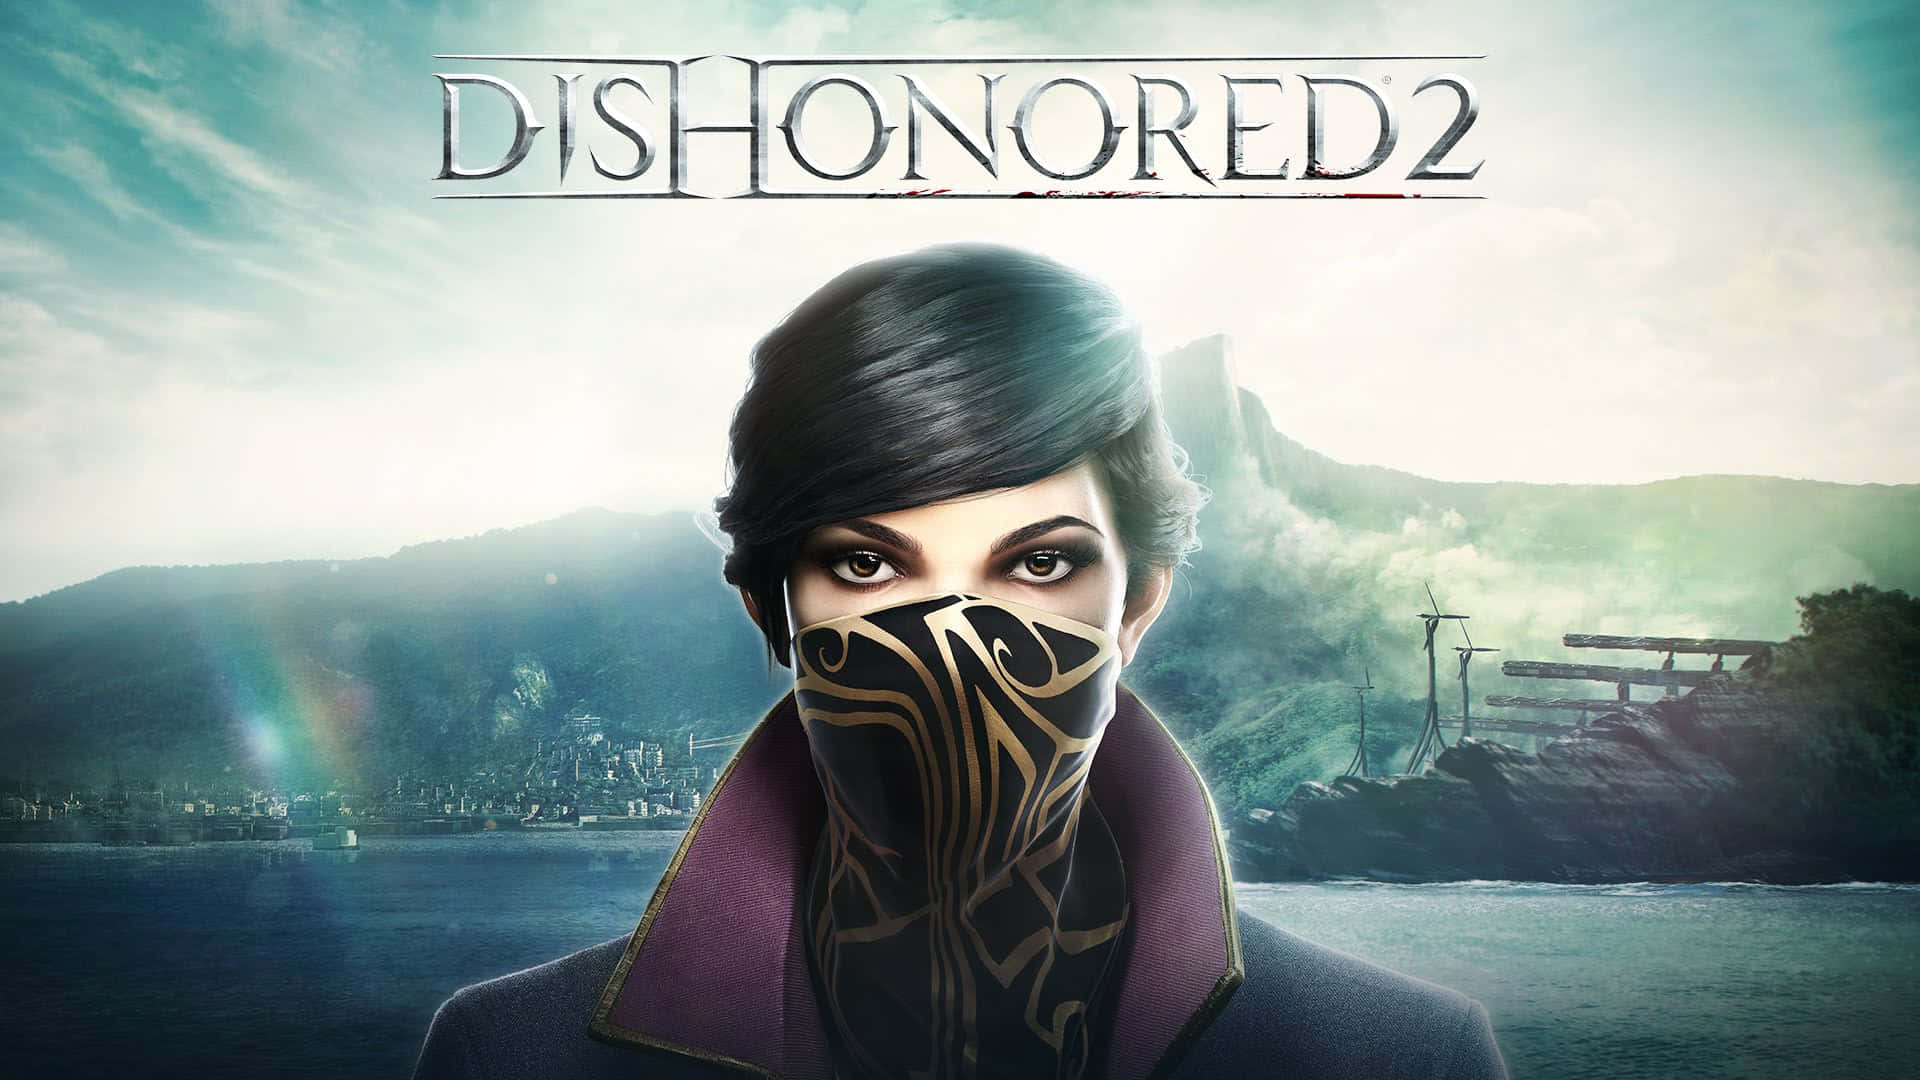 Stunning Dishonored 2 Game Background